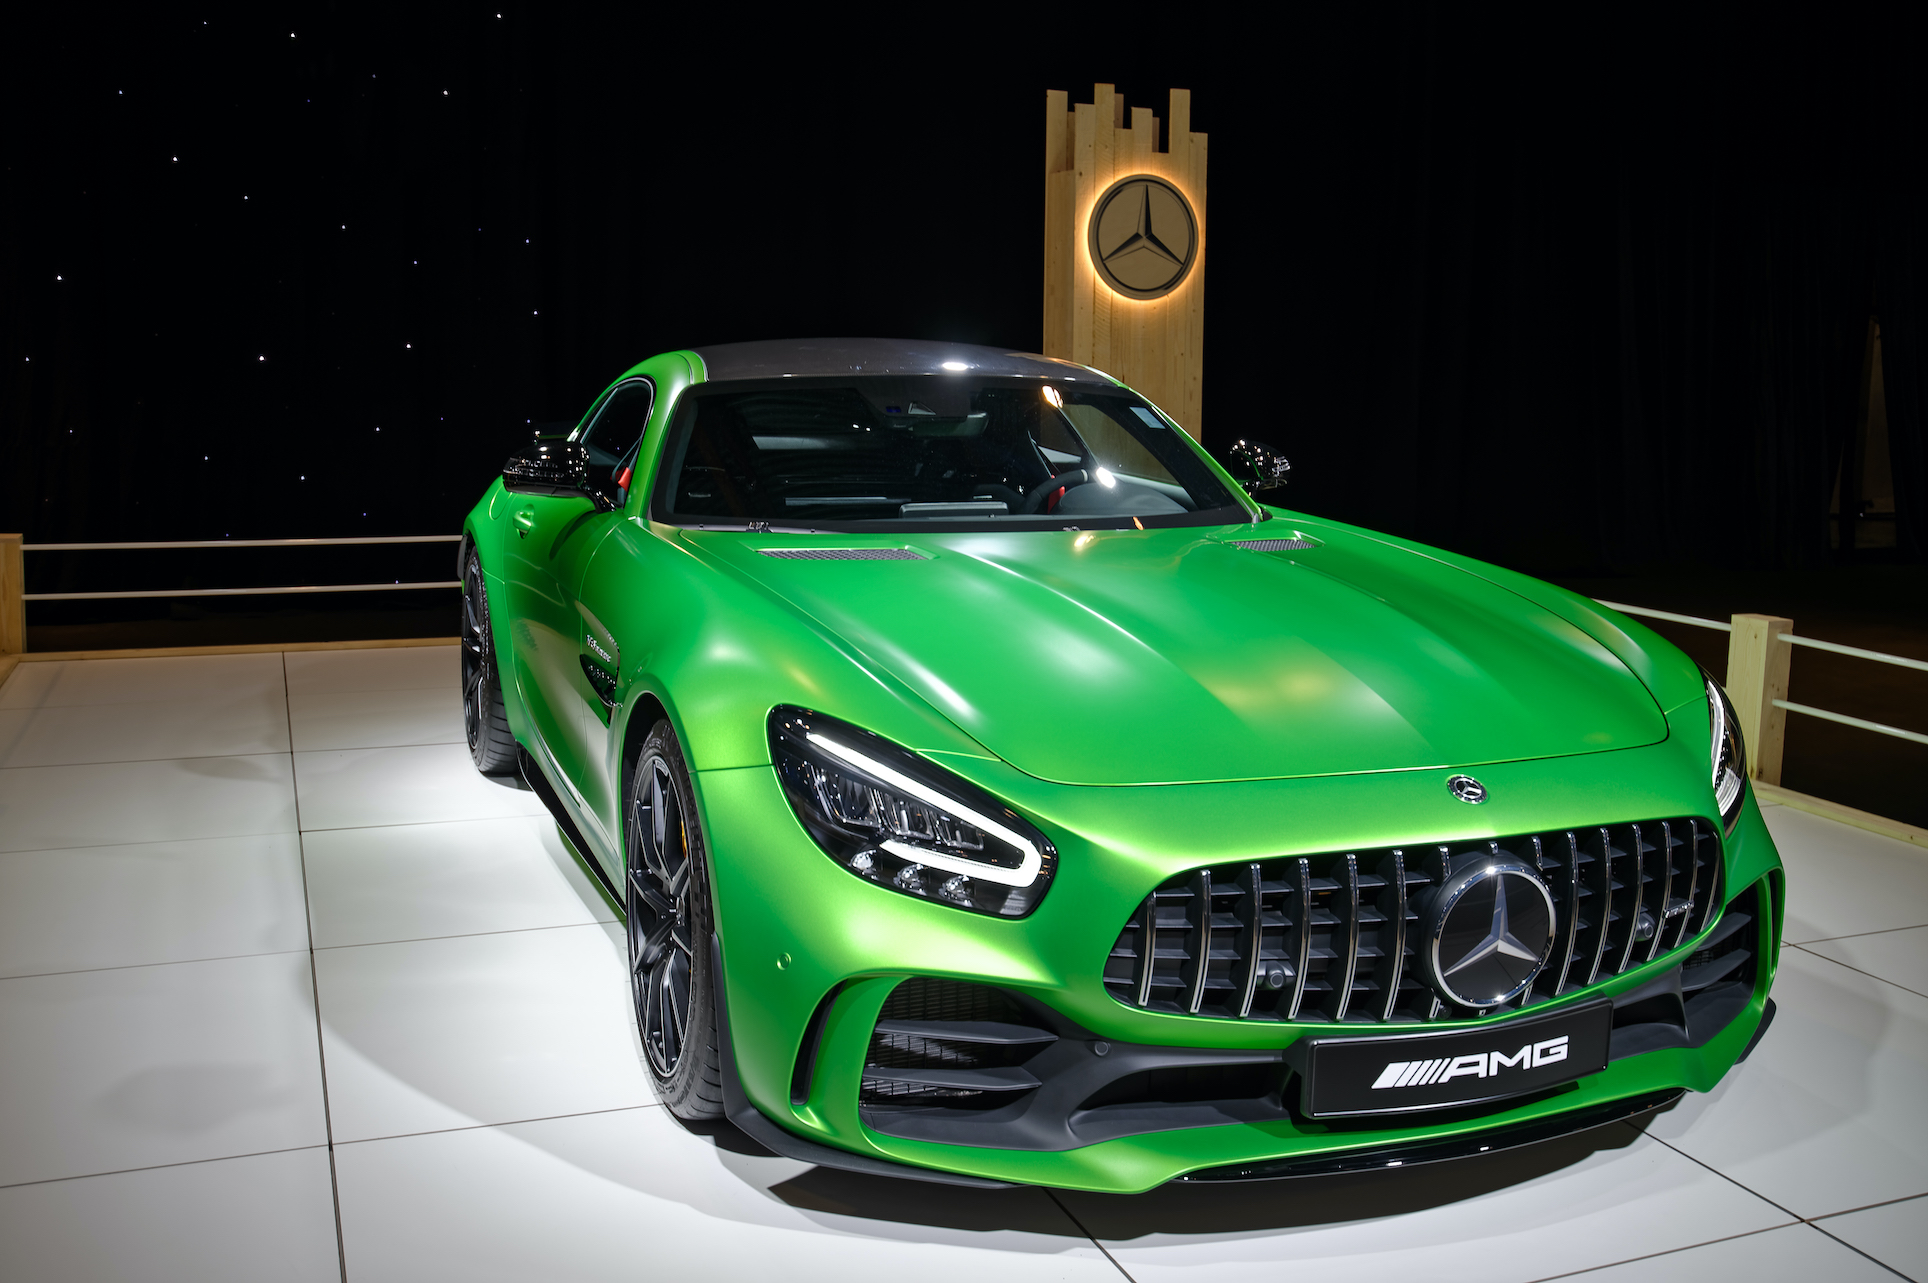 At Brussels Dream Cars Show 2020 the brand Mercedes exhibits its new model Mercedes-AMG GT R Coupe